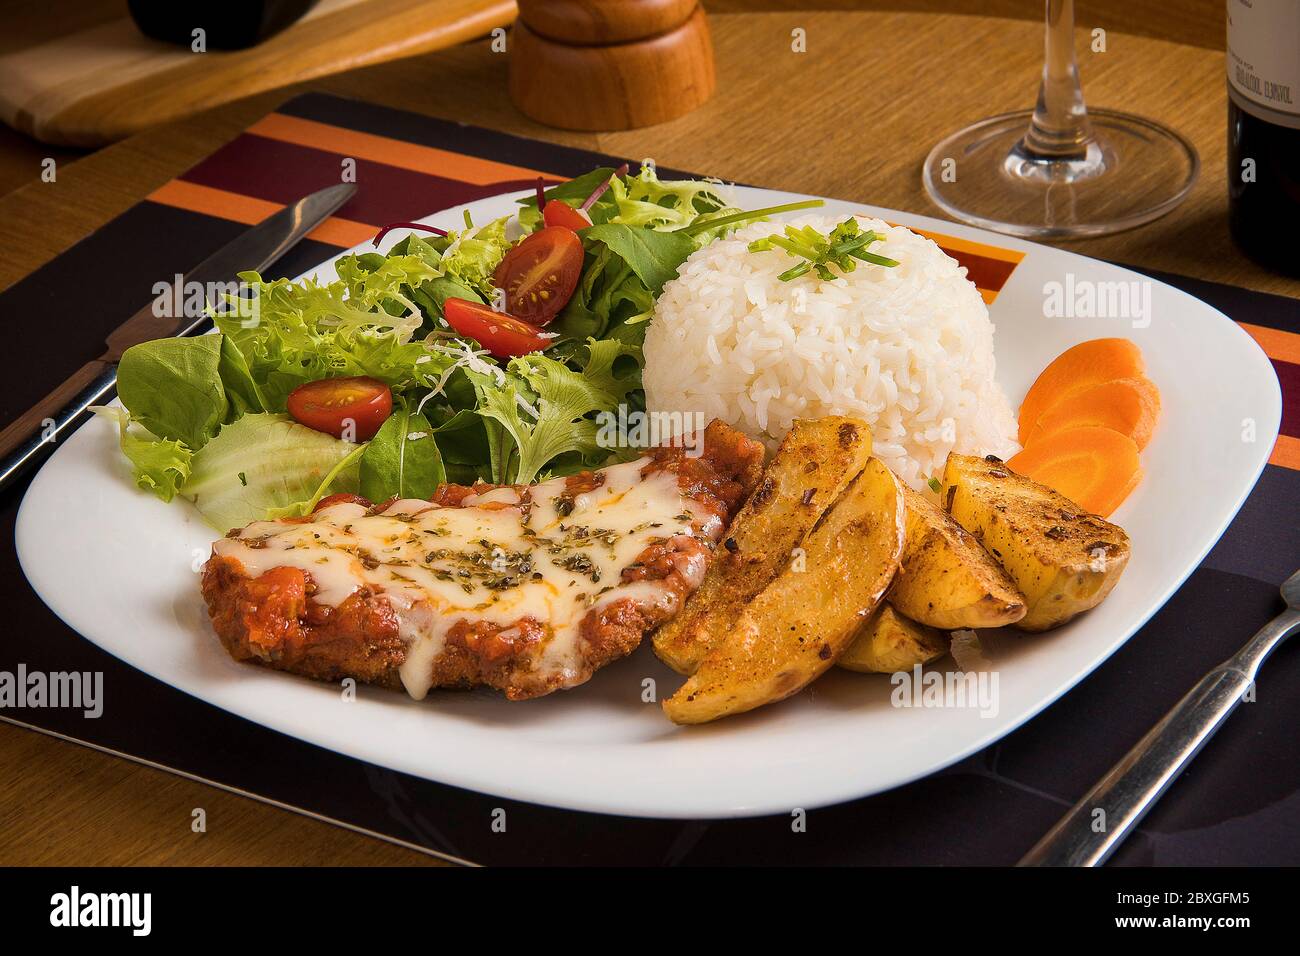 Breaded chicken with cheese, potato wedges, rice, lettuce, carrot and tomato salad Stock Photo